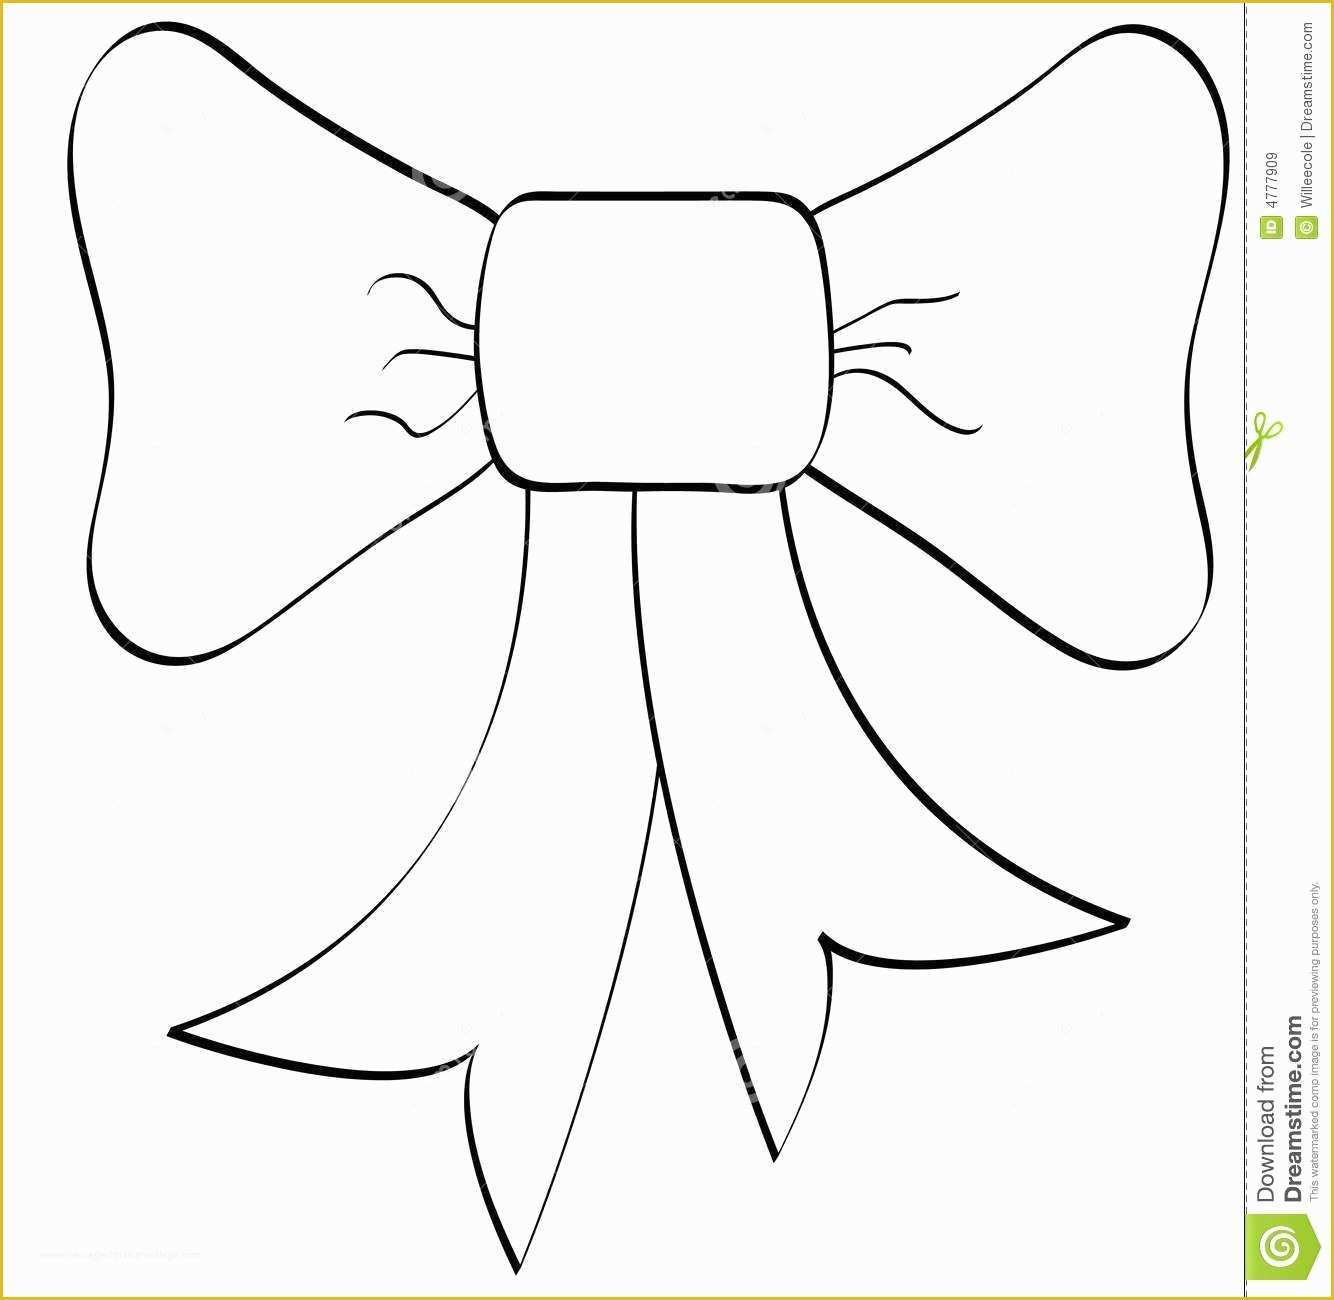 Cheer Bow Template Printable Free Of Hair Bow Coloring Pages Best Image Col...